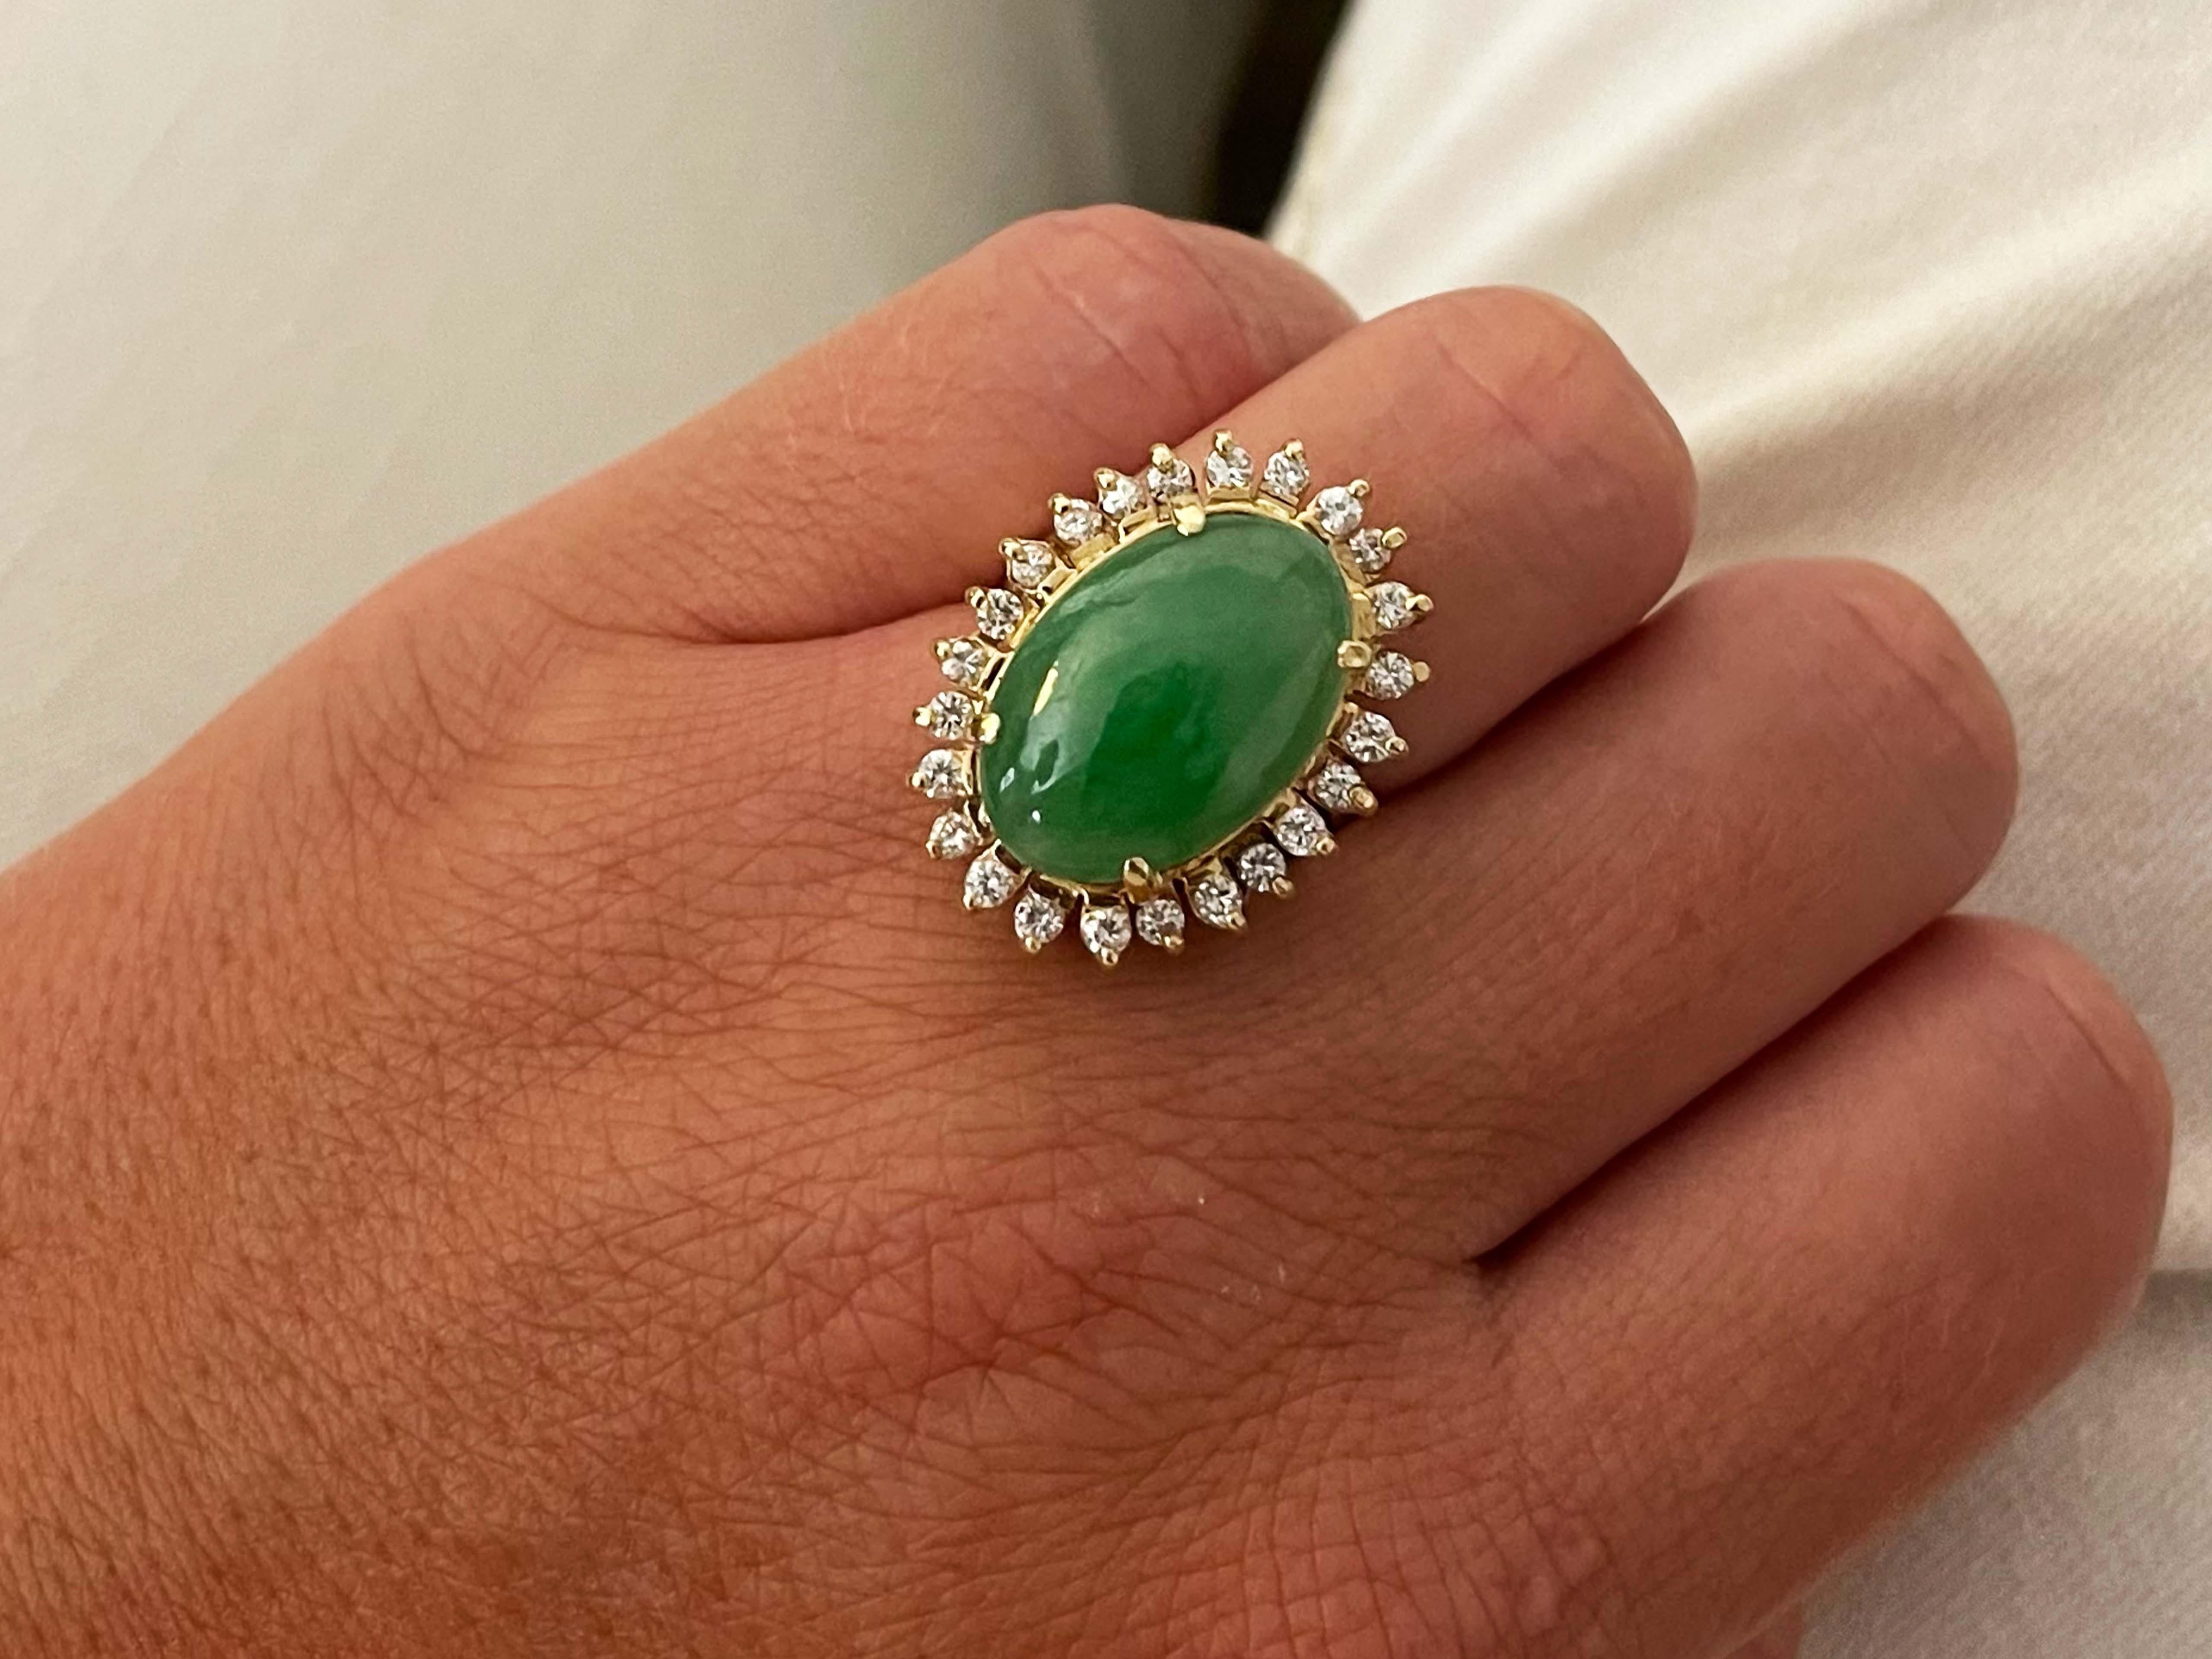 Item Specifications:

Metal: Yellow Gold 

Style: Statement Ring

Ring Size: 5.75 (resizing available for a fee)

Total Weight: 10 Grams

Gemstone Specifications:

Center Gemstone: Jadeite Jade

Shape: Oval

Color: Green

Cut: Cabochon 

Jade Carat